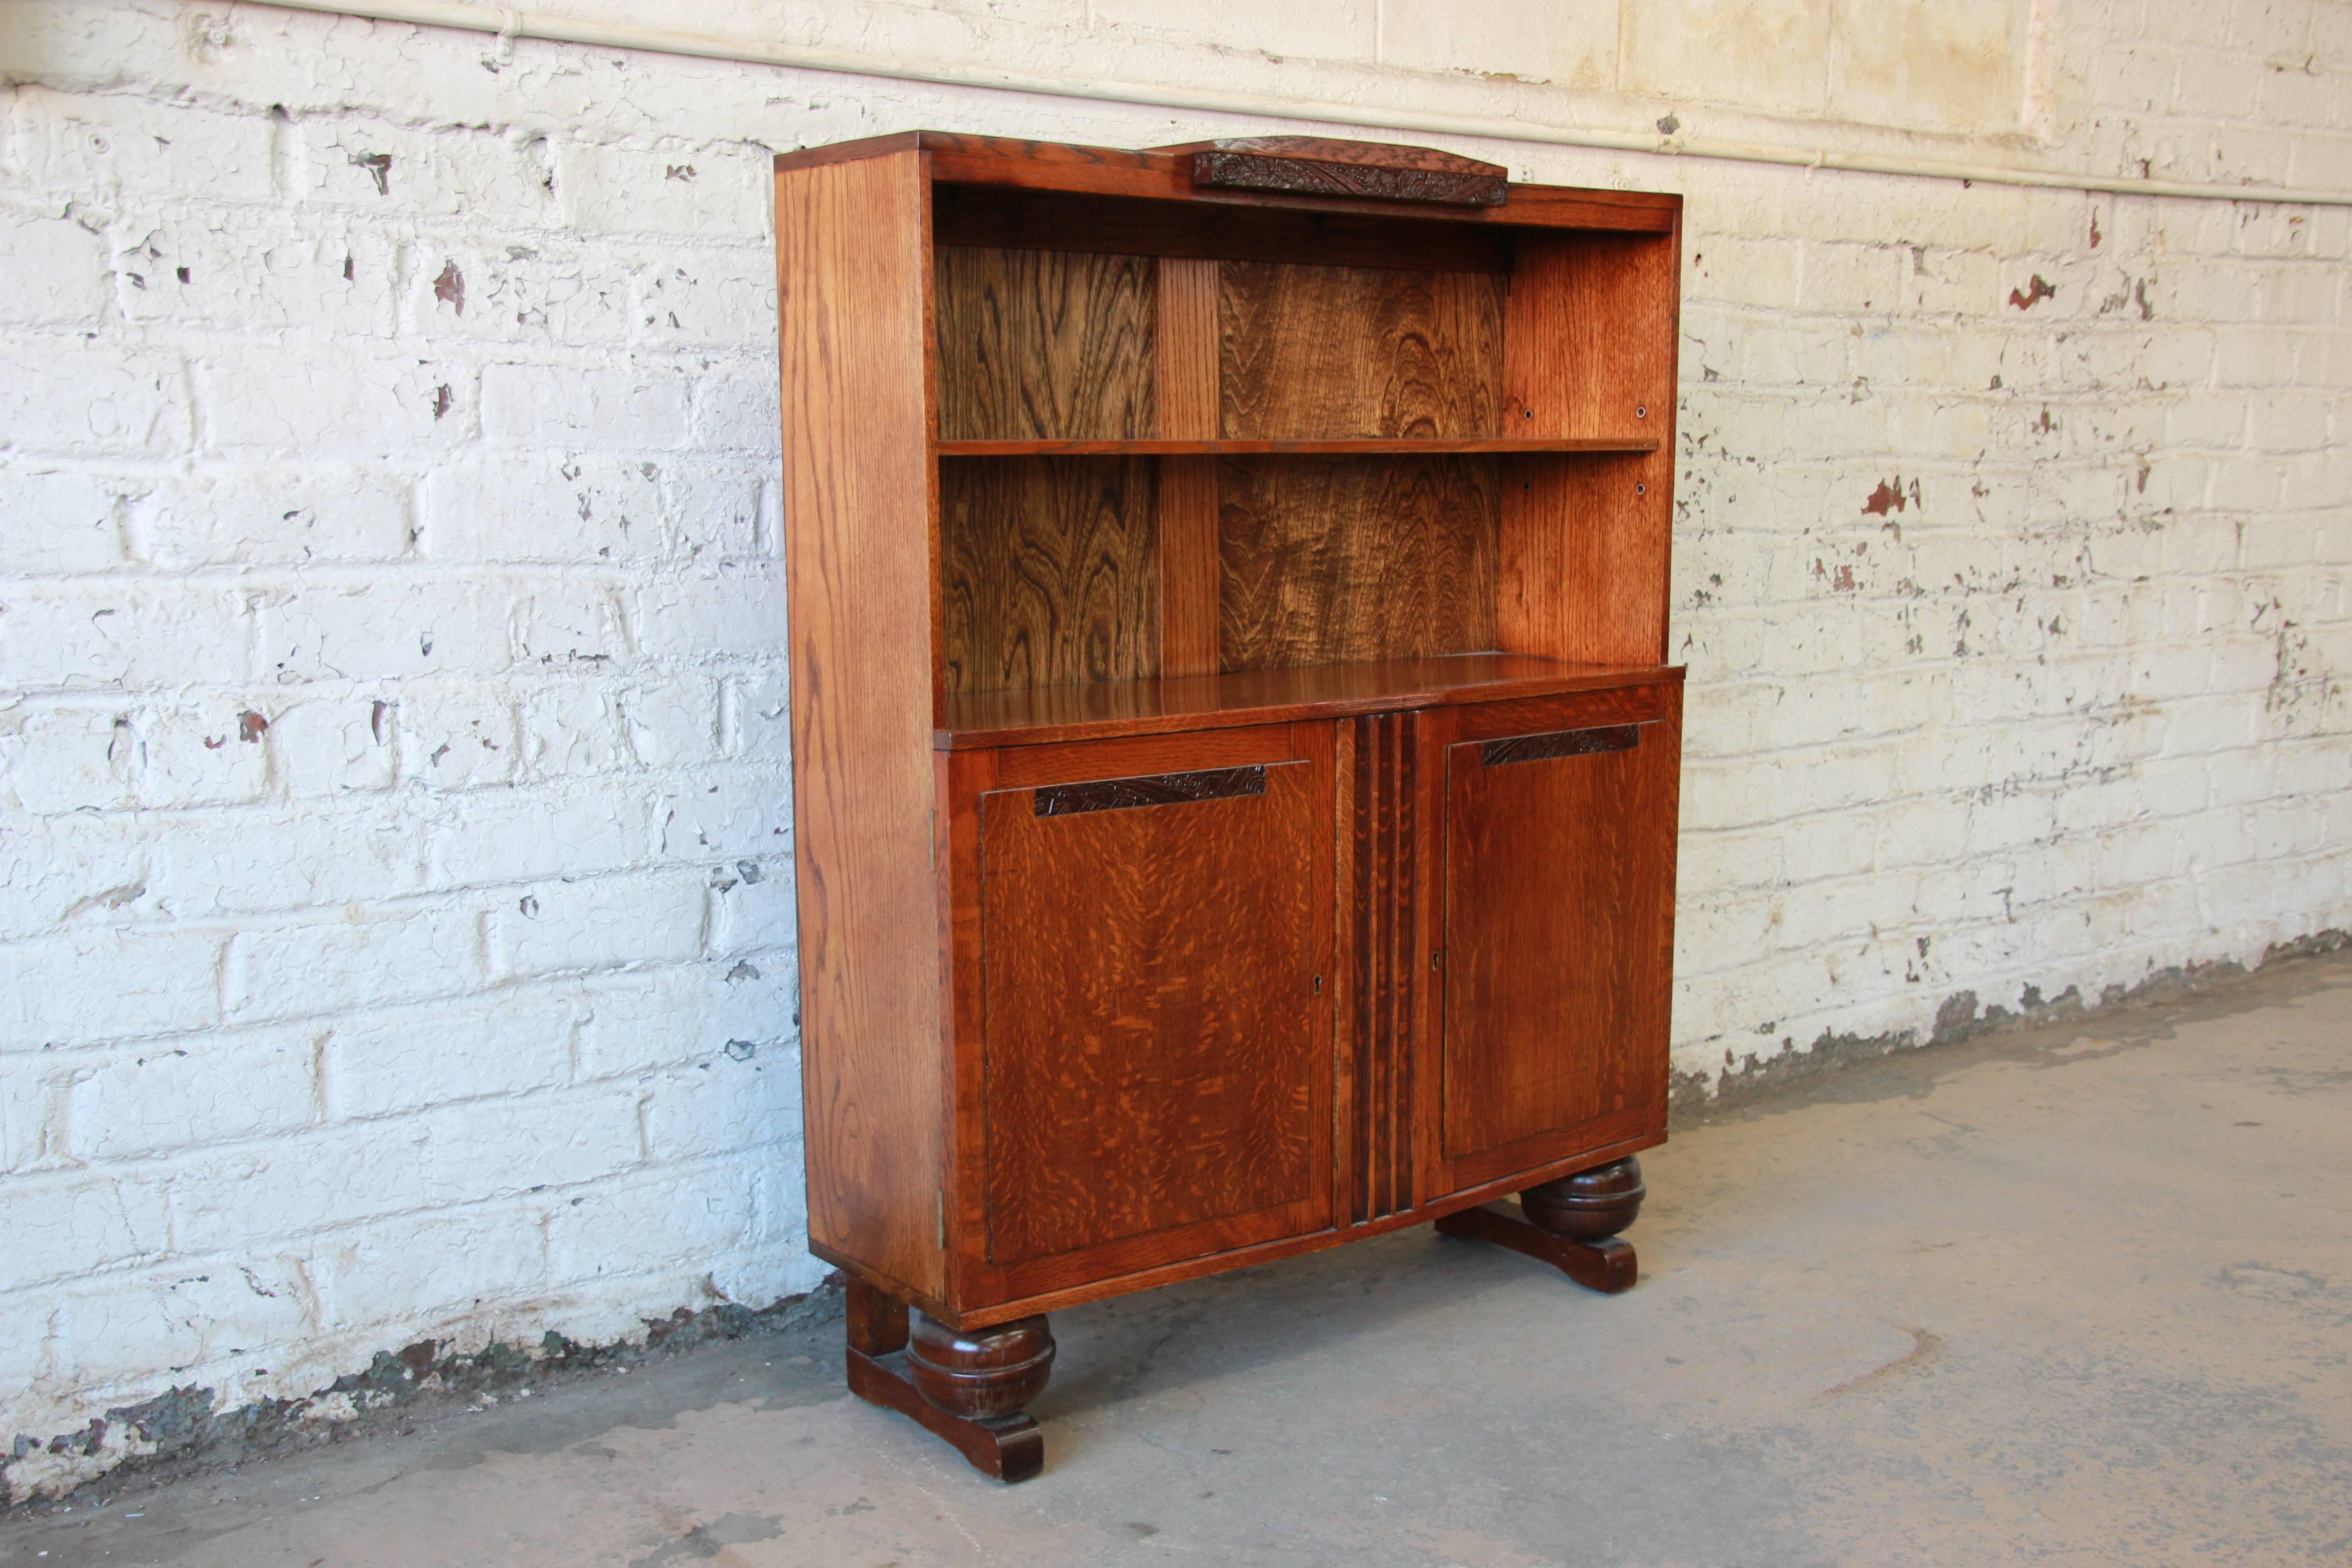 Offering a beautiful petite antique French Art Deco oak bookcase, circa 1920s. The top portion of the bookcase has an adjustable shelf with nice carved floral details above. The lower potion has two locking cabinet doors (locking key included) that